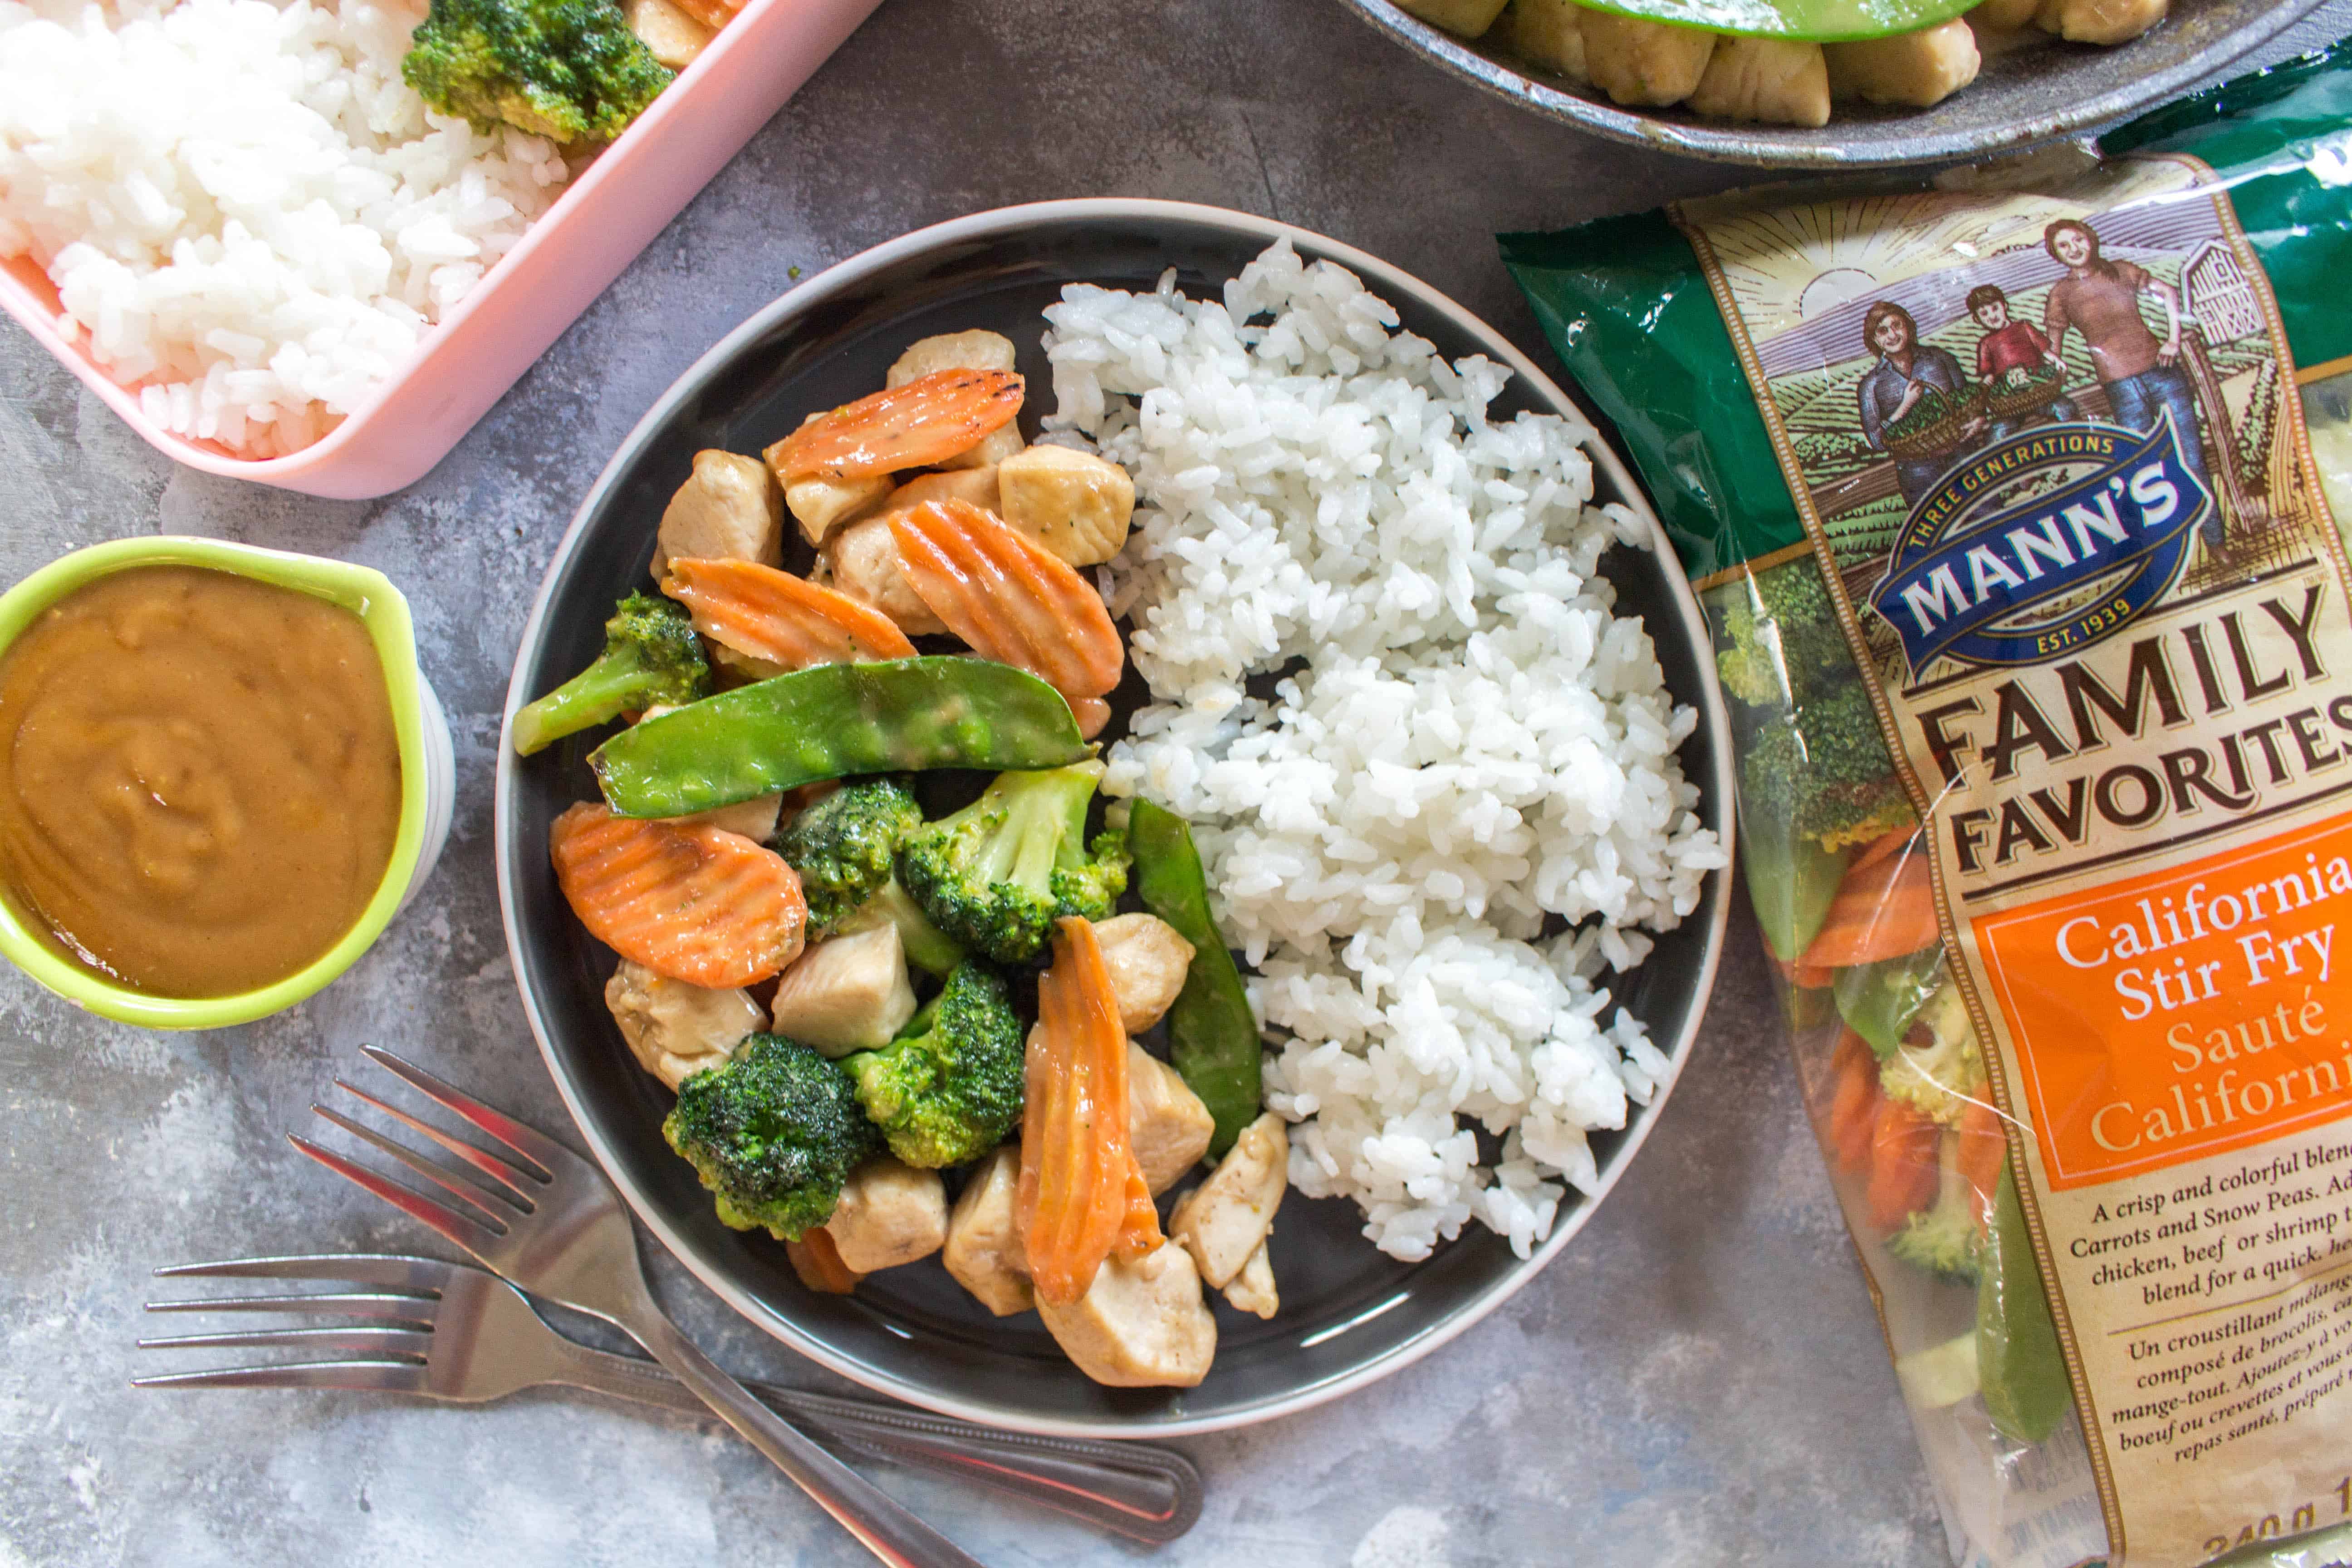 Craving a delicious satay stir fry from your local take out place? Skip the take out and make your own healthy chicken and vegetable stir fry with peanut sauce. It takes less than 30 minutes and you can pack the leftovers as a work lunch!